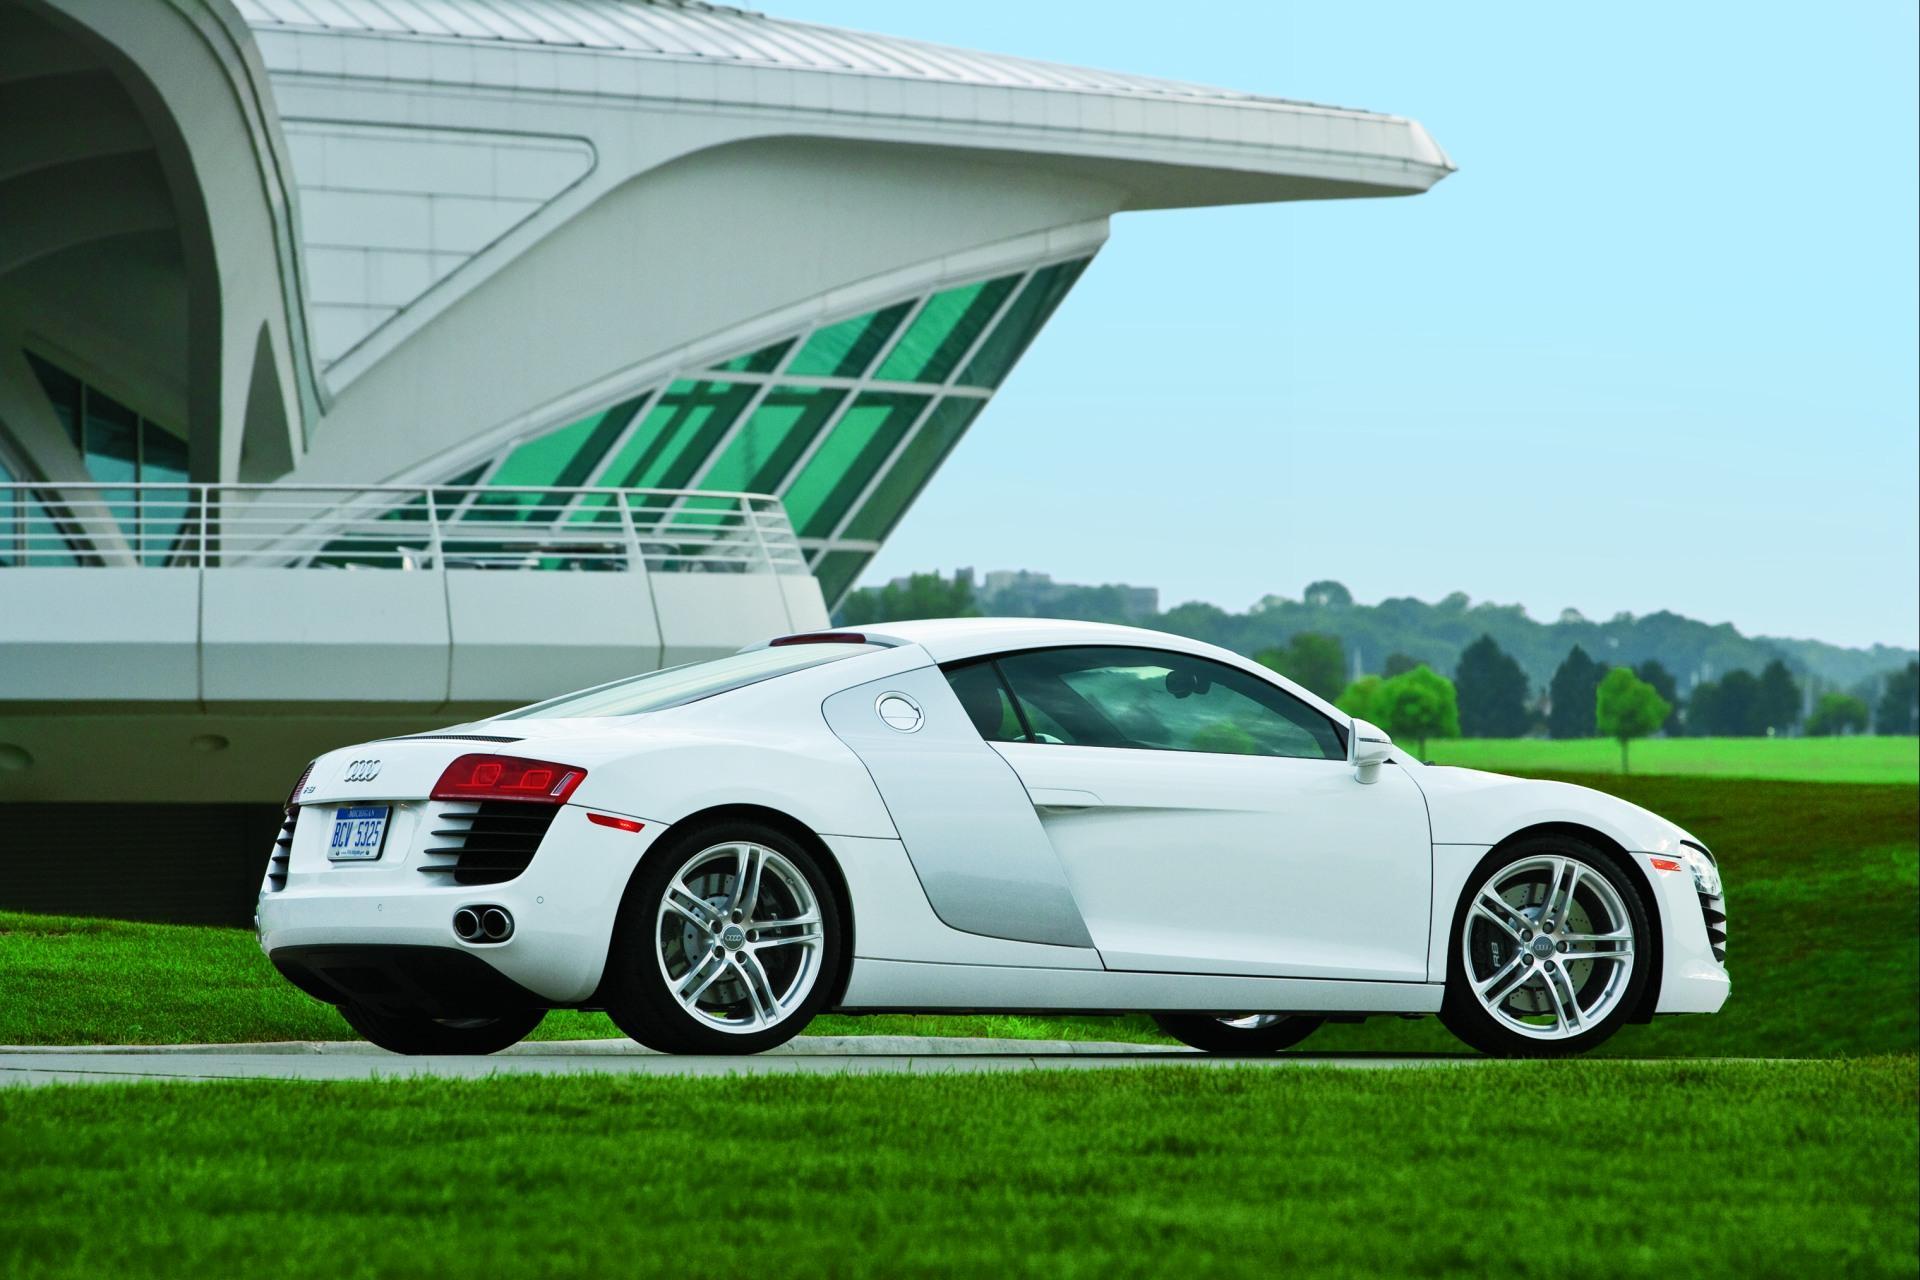 Audi R8 News and Information